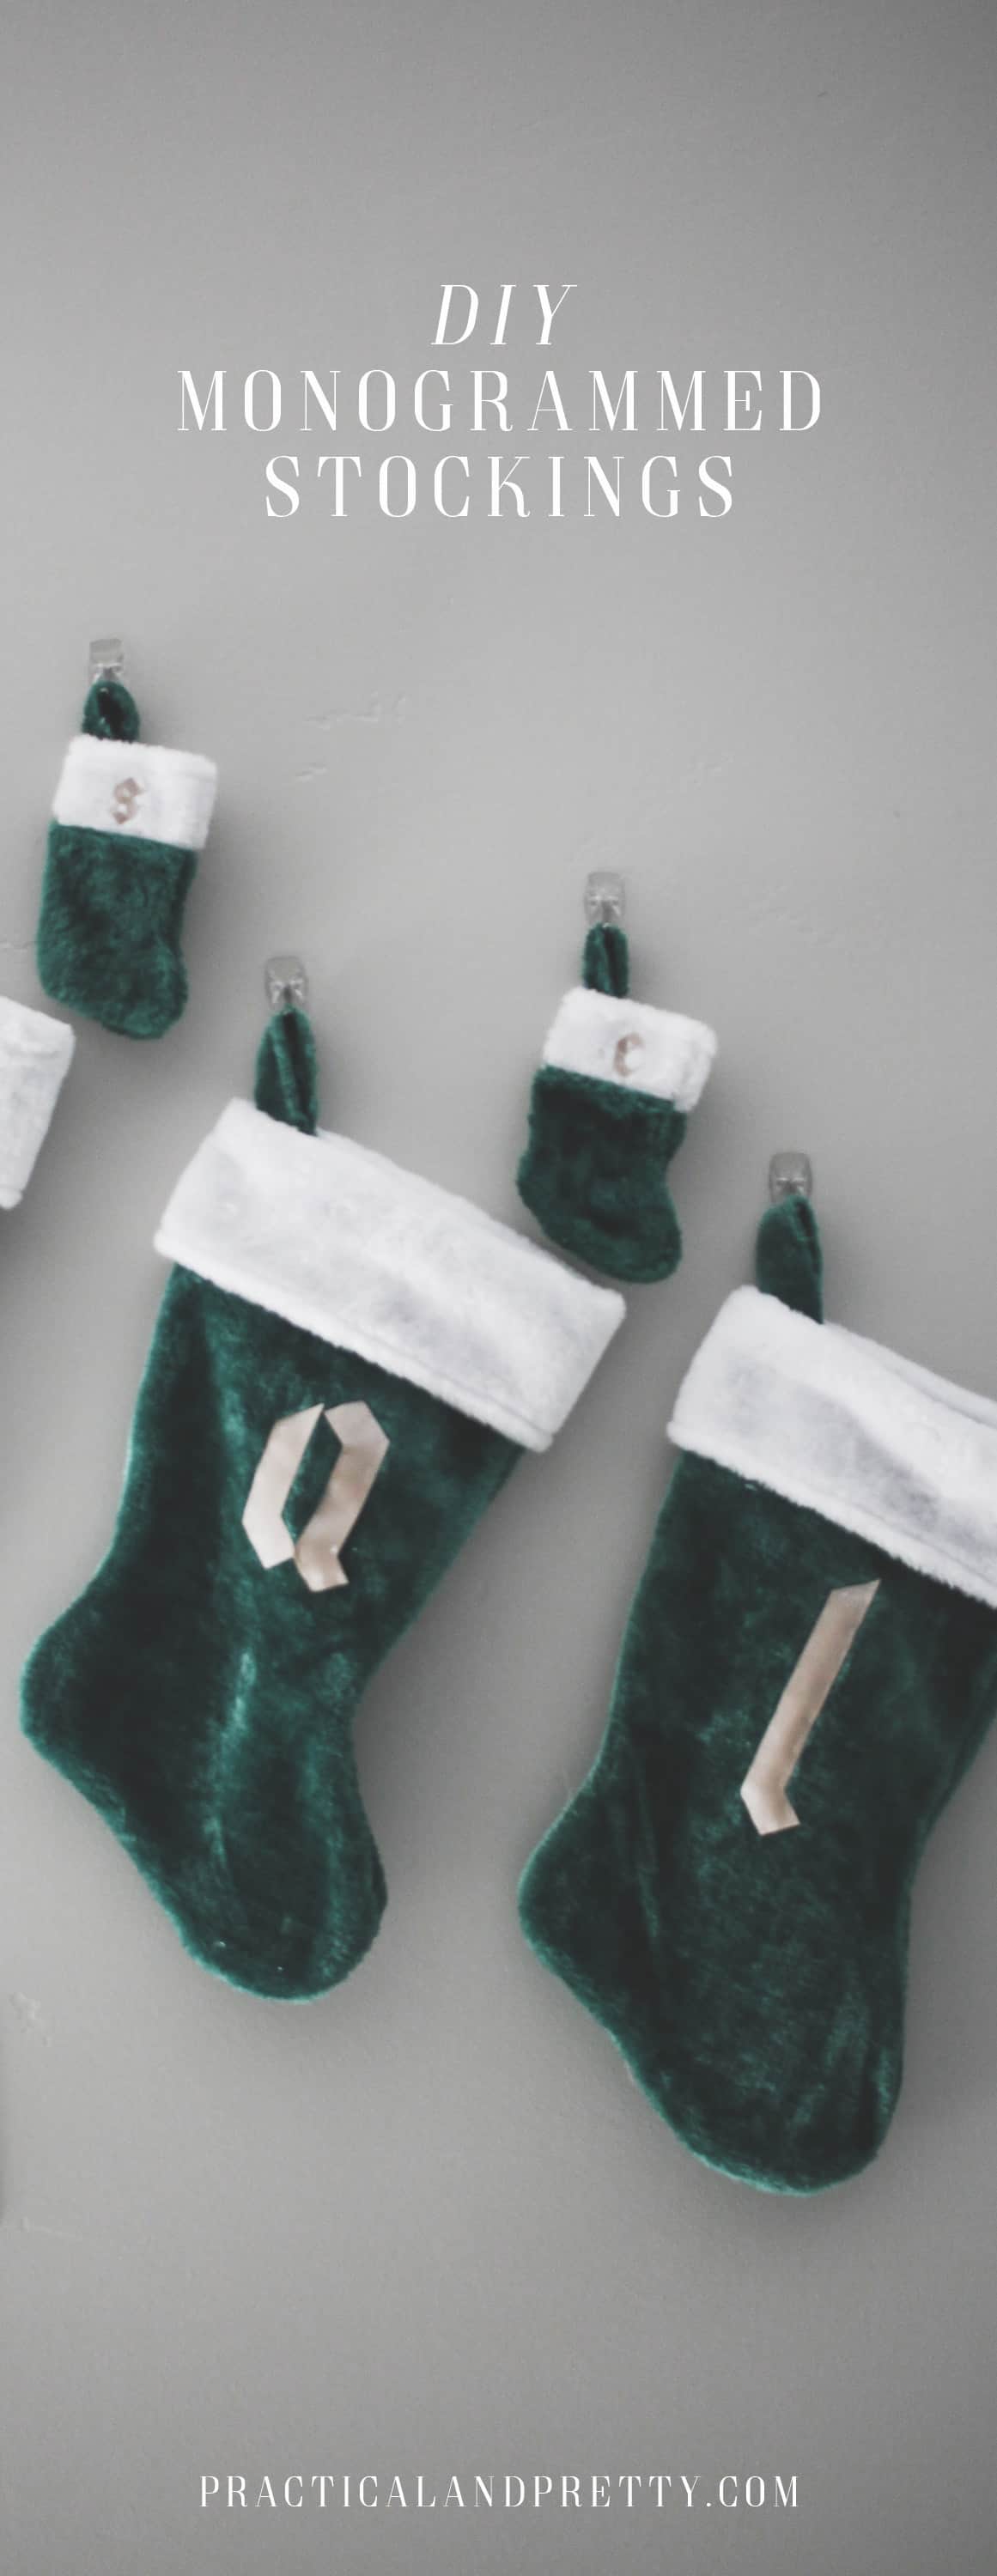 The Cricut made these DIY stockings a breeze! i love having each of our initials monogrammed and I only spent $2!